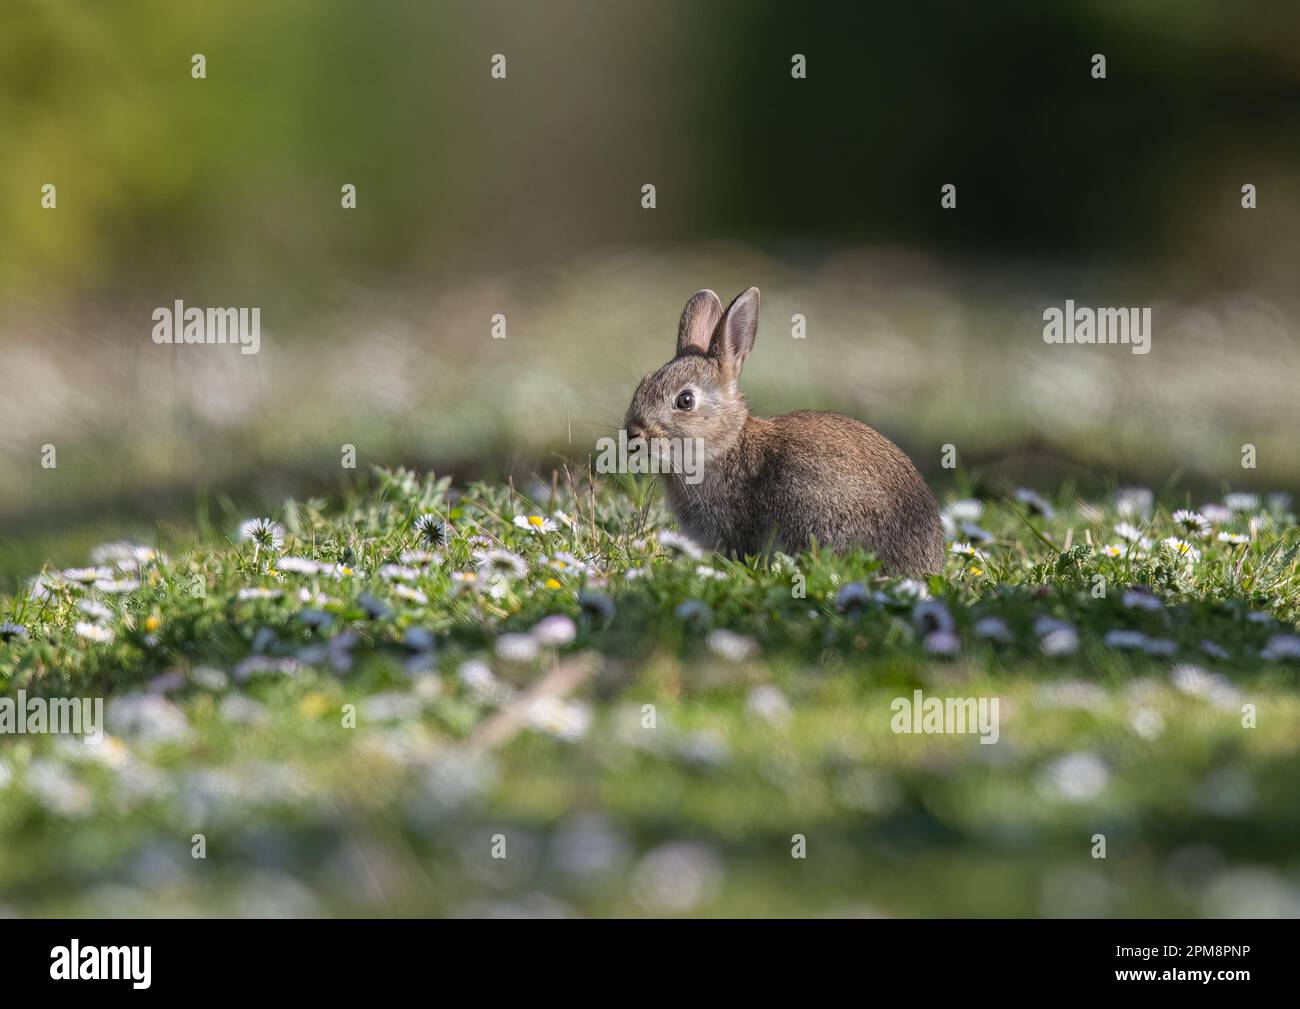 https://c8.alamy.com/comp/2PM8PNP/a-tiny-cute-baby-bunny-rabbit-sitting-in-a-meadow-surrounded-by-daisies-suffolk-uk-2PM8PNP.jpg